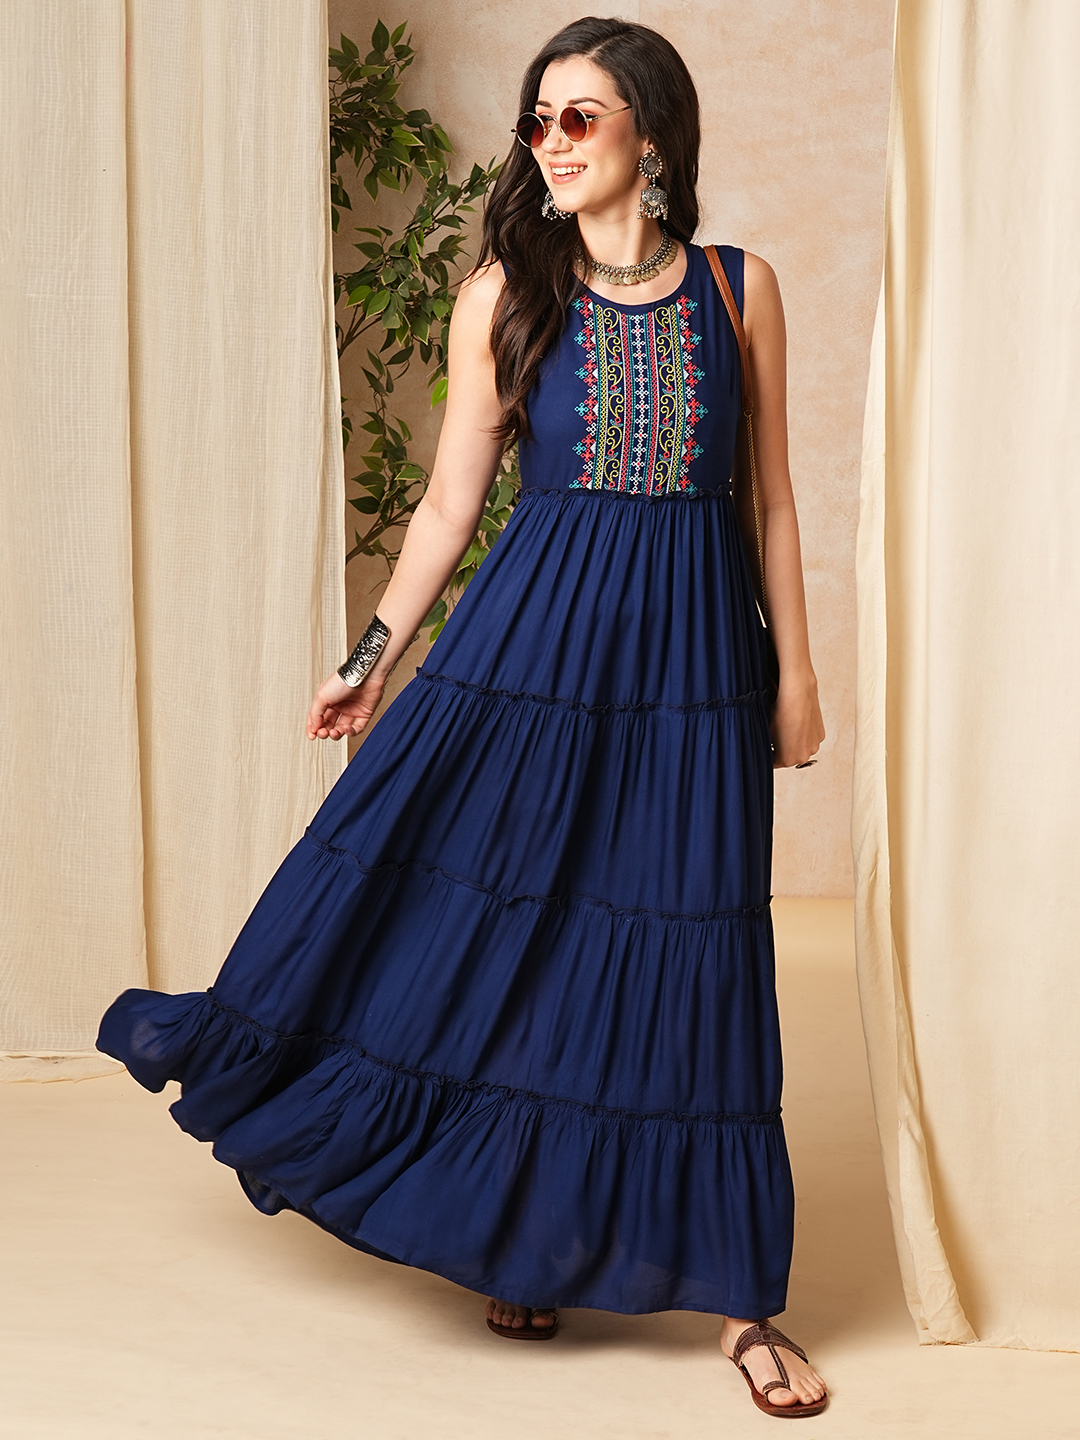 Globus Women Navy Embroidered Yoke Tiered A-Line Maxi Dress